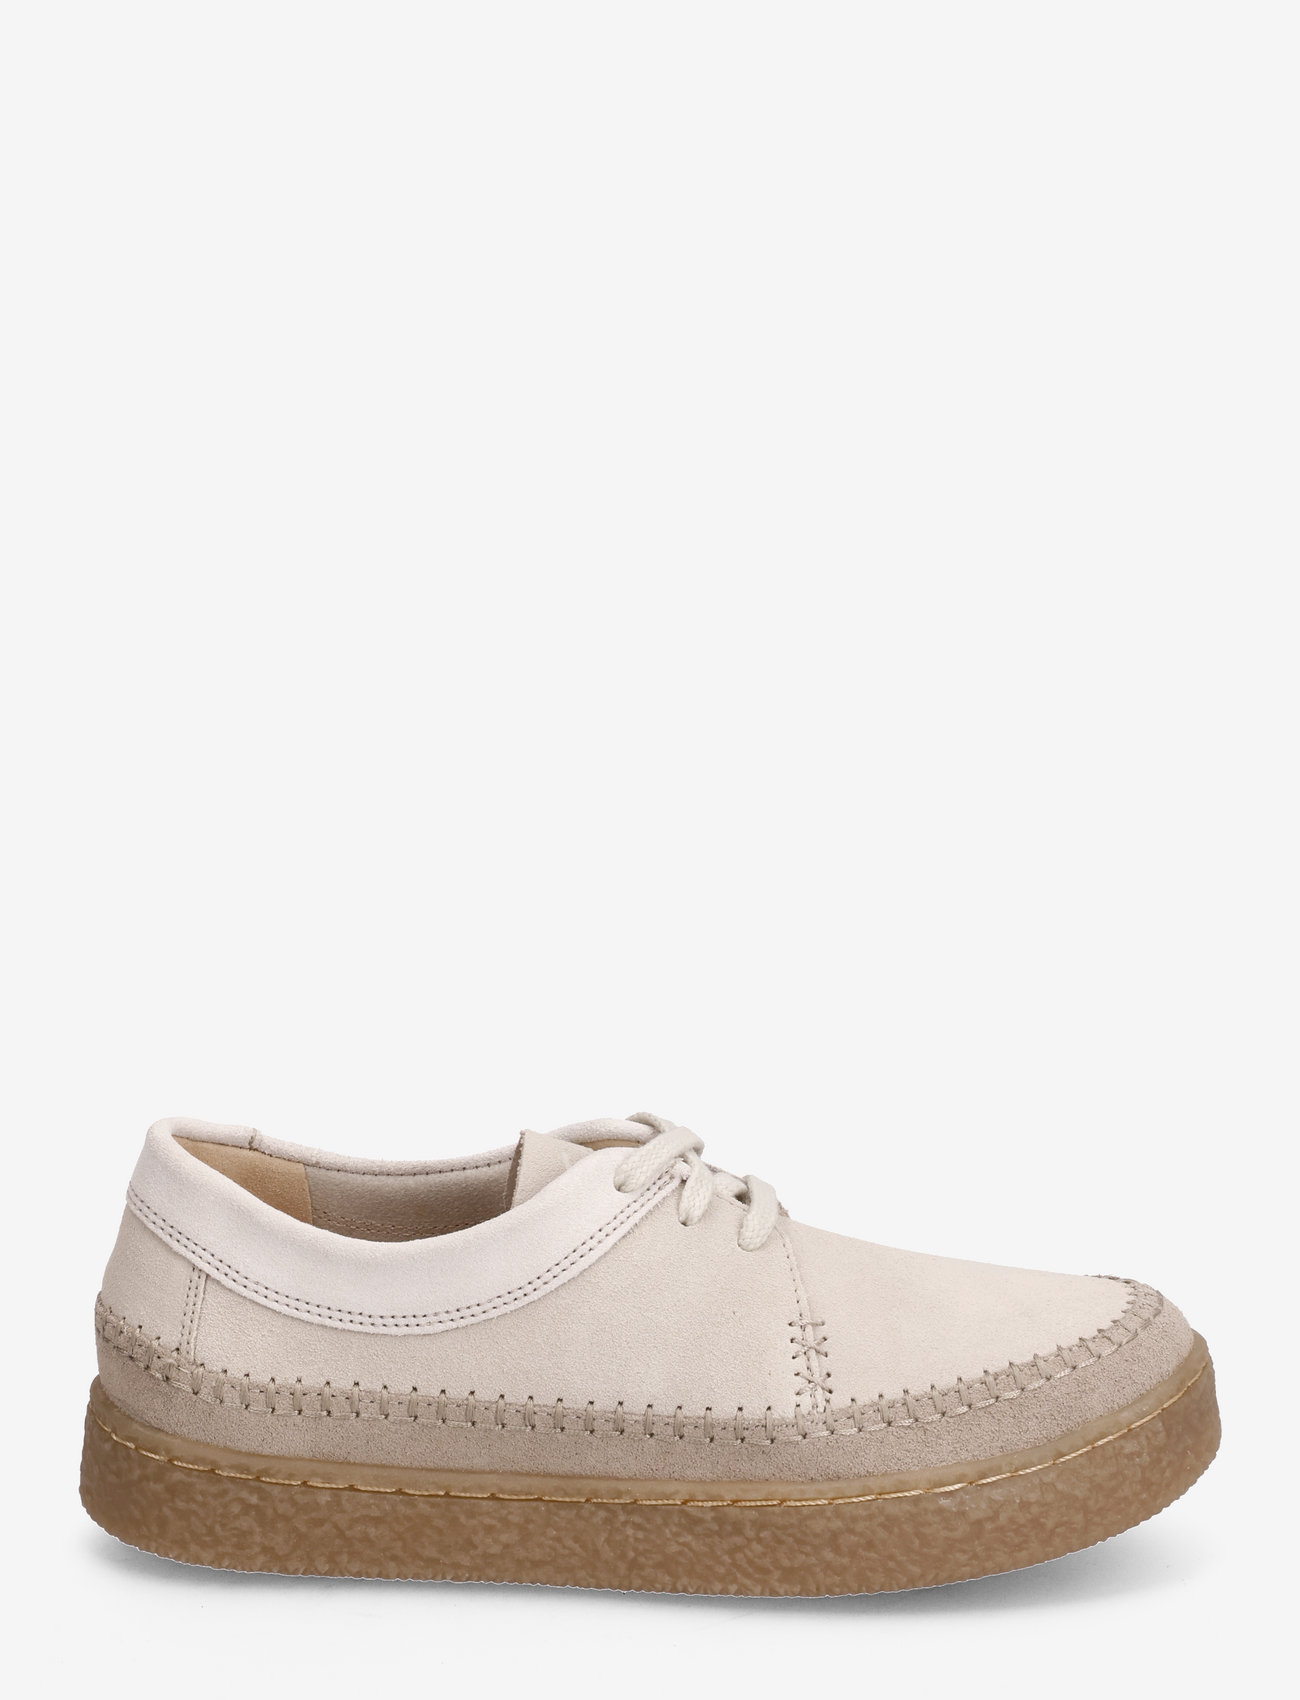 Clarks - Barleigh Weave - low top sneakers - white combi - 1